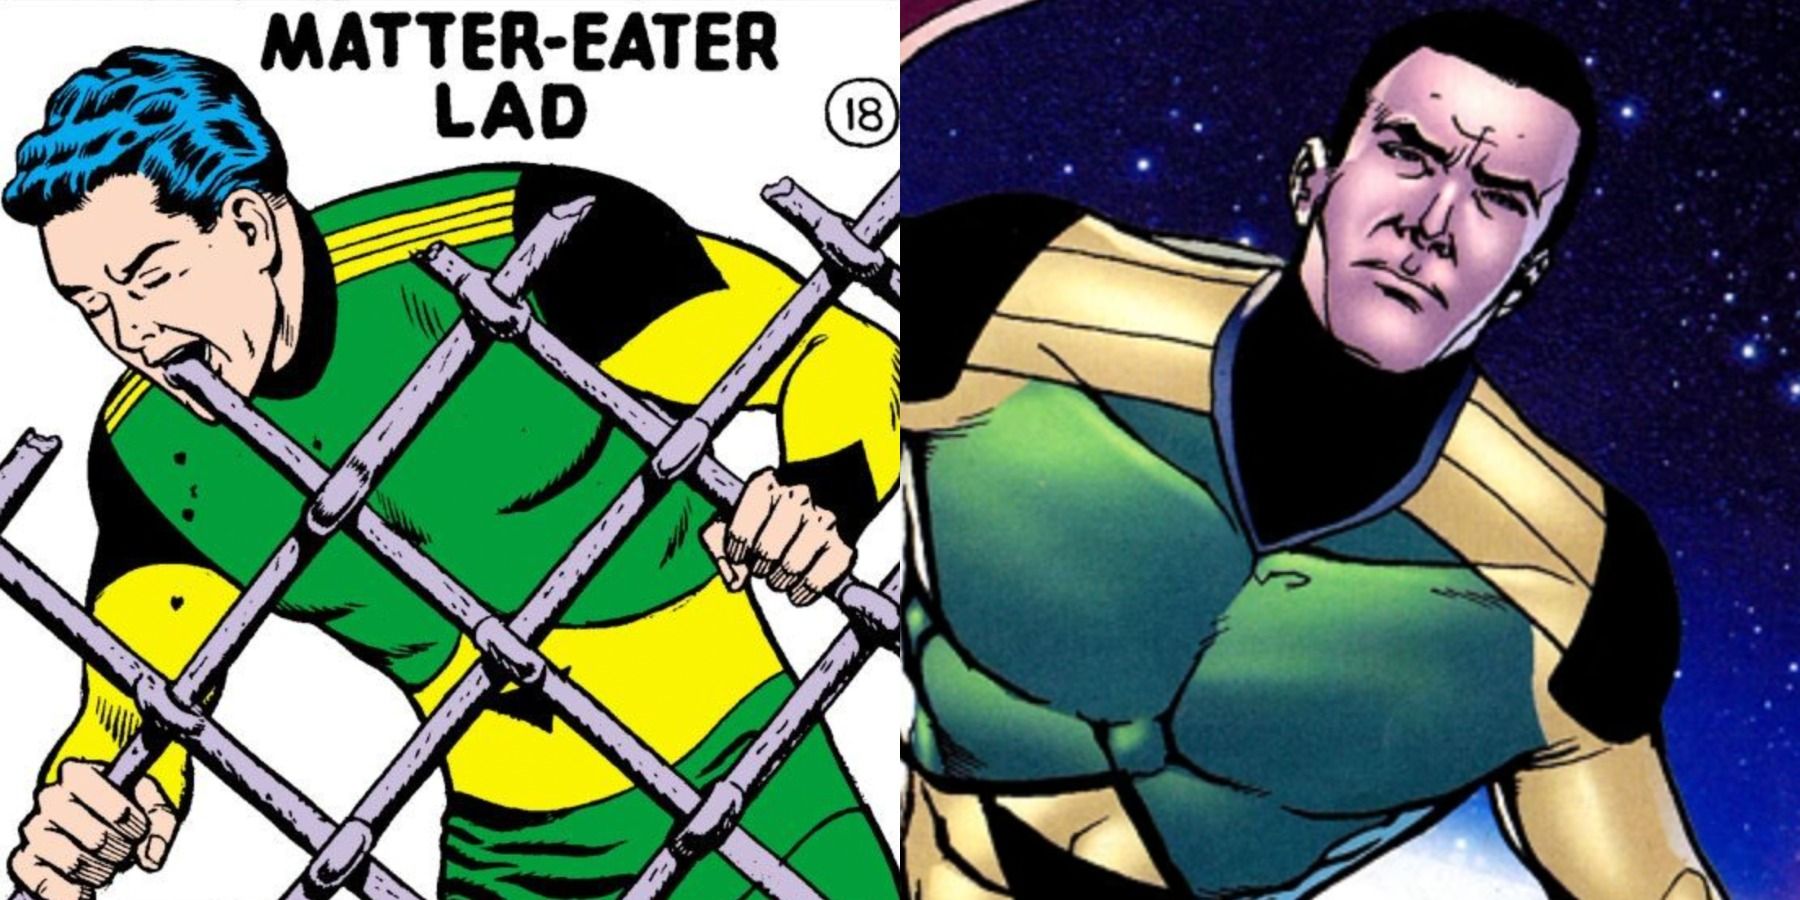 A split image depicts Matter-Eater Lad in his original and modern comic book designs